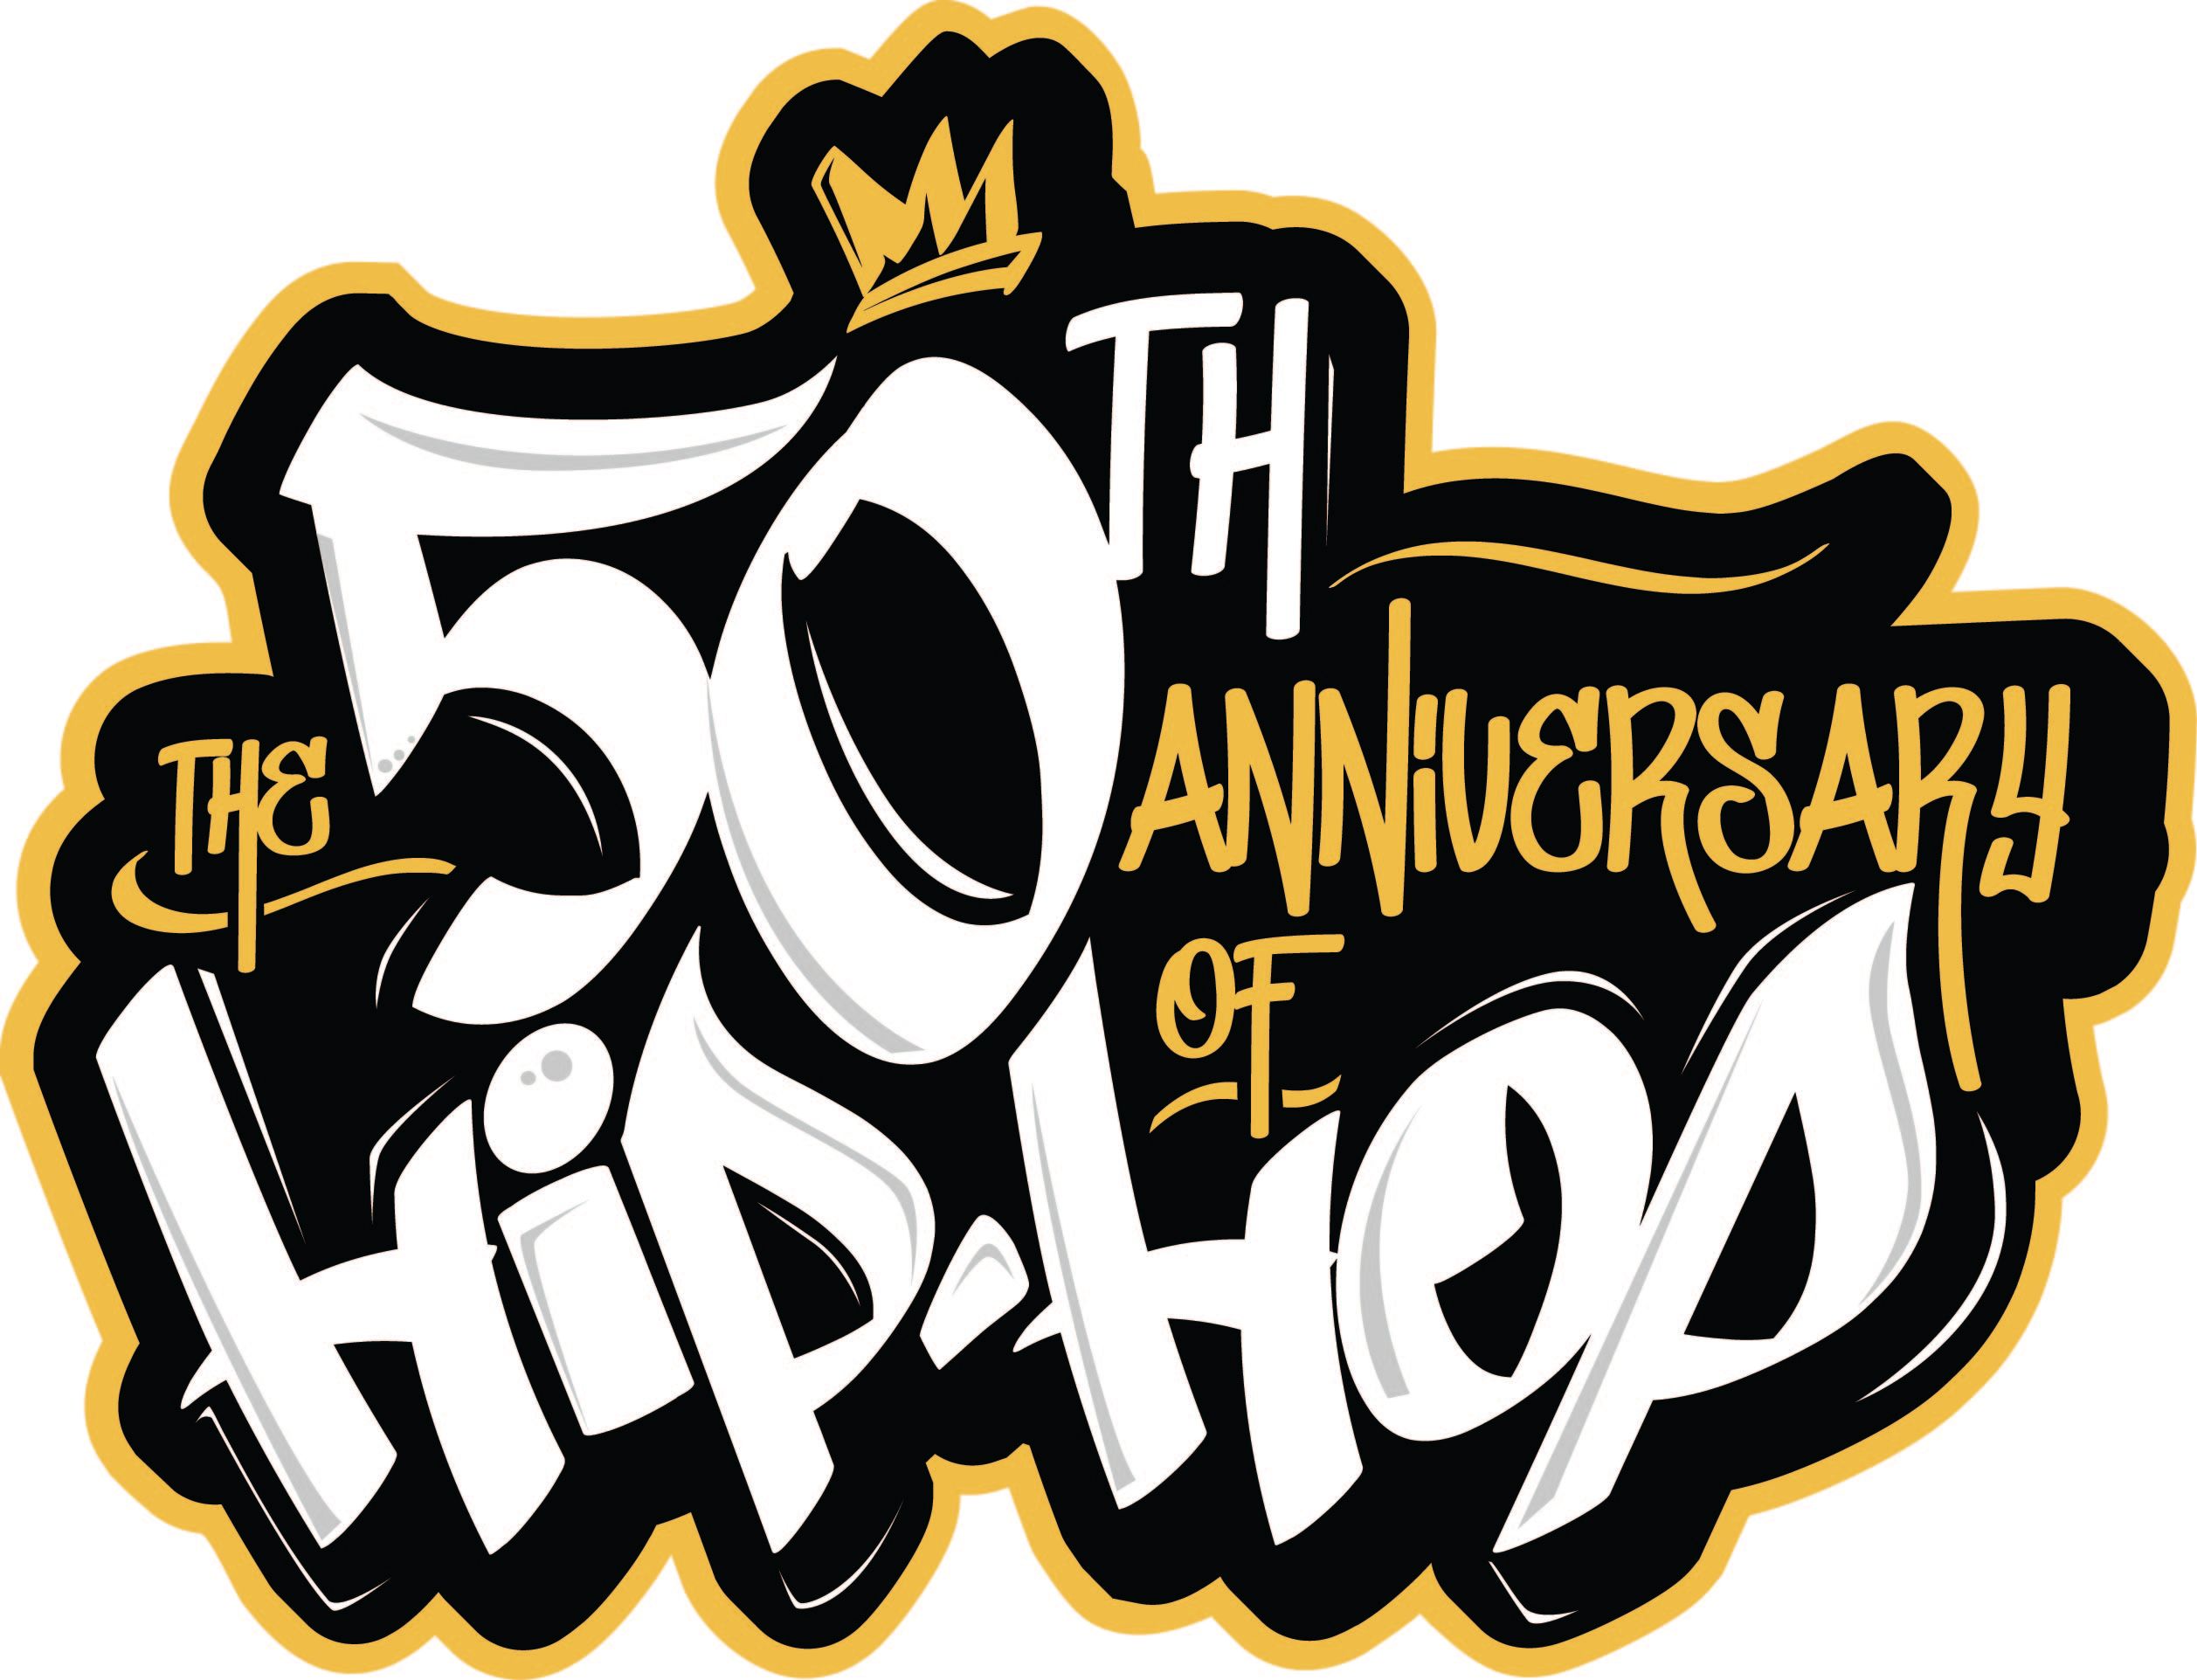 Black Tie and Sneaker Ball Announced for 50th Anniversary of Hip Hop